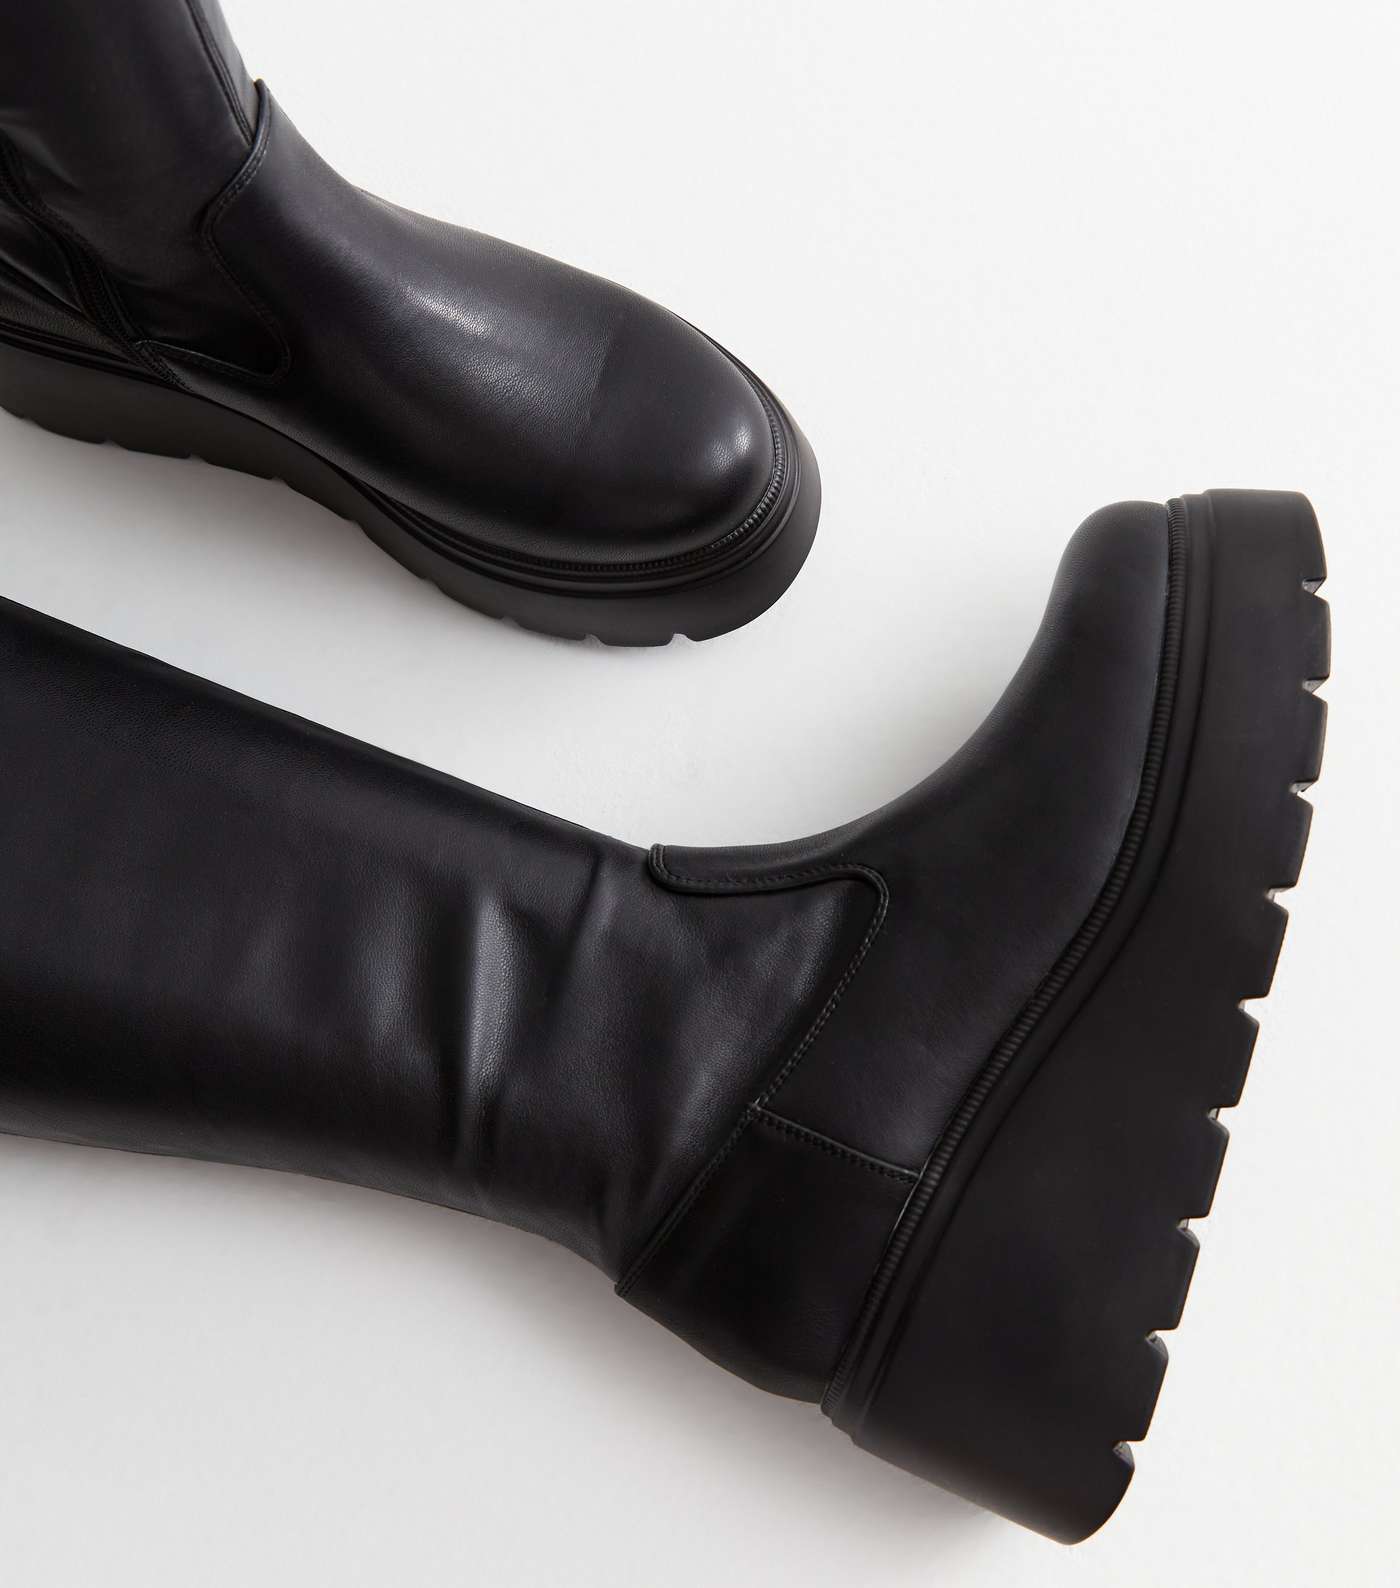 Black Leather-Look Stretch Wedge Heel High Leg Boots Image 3